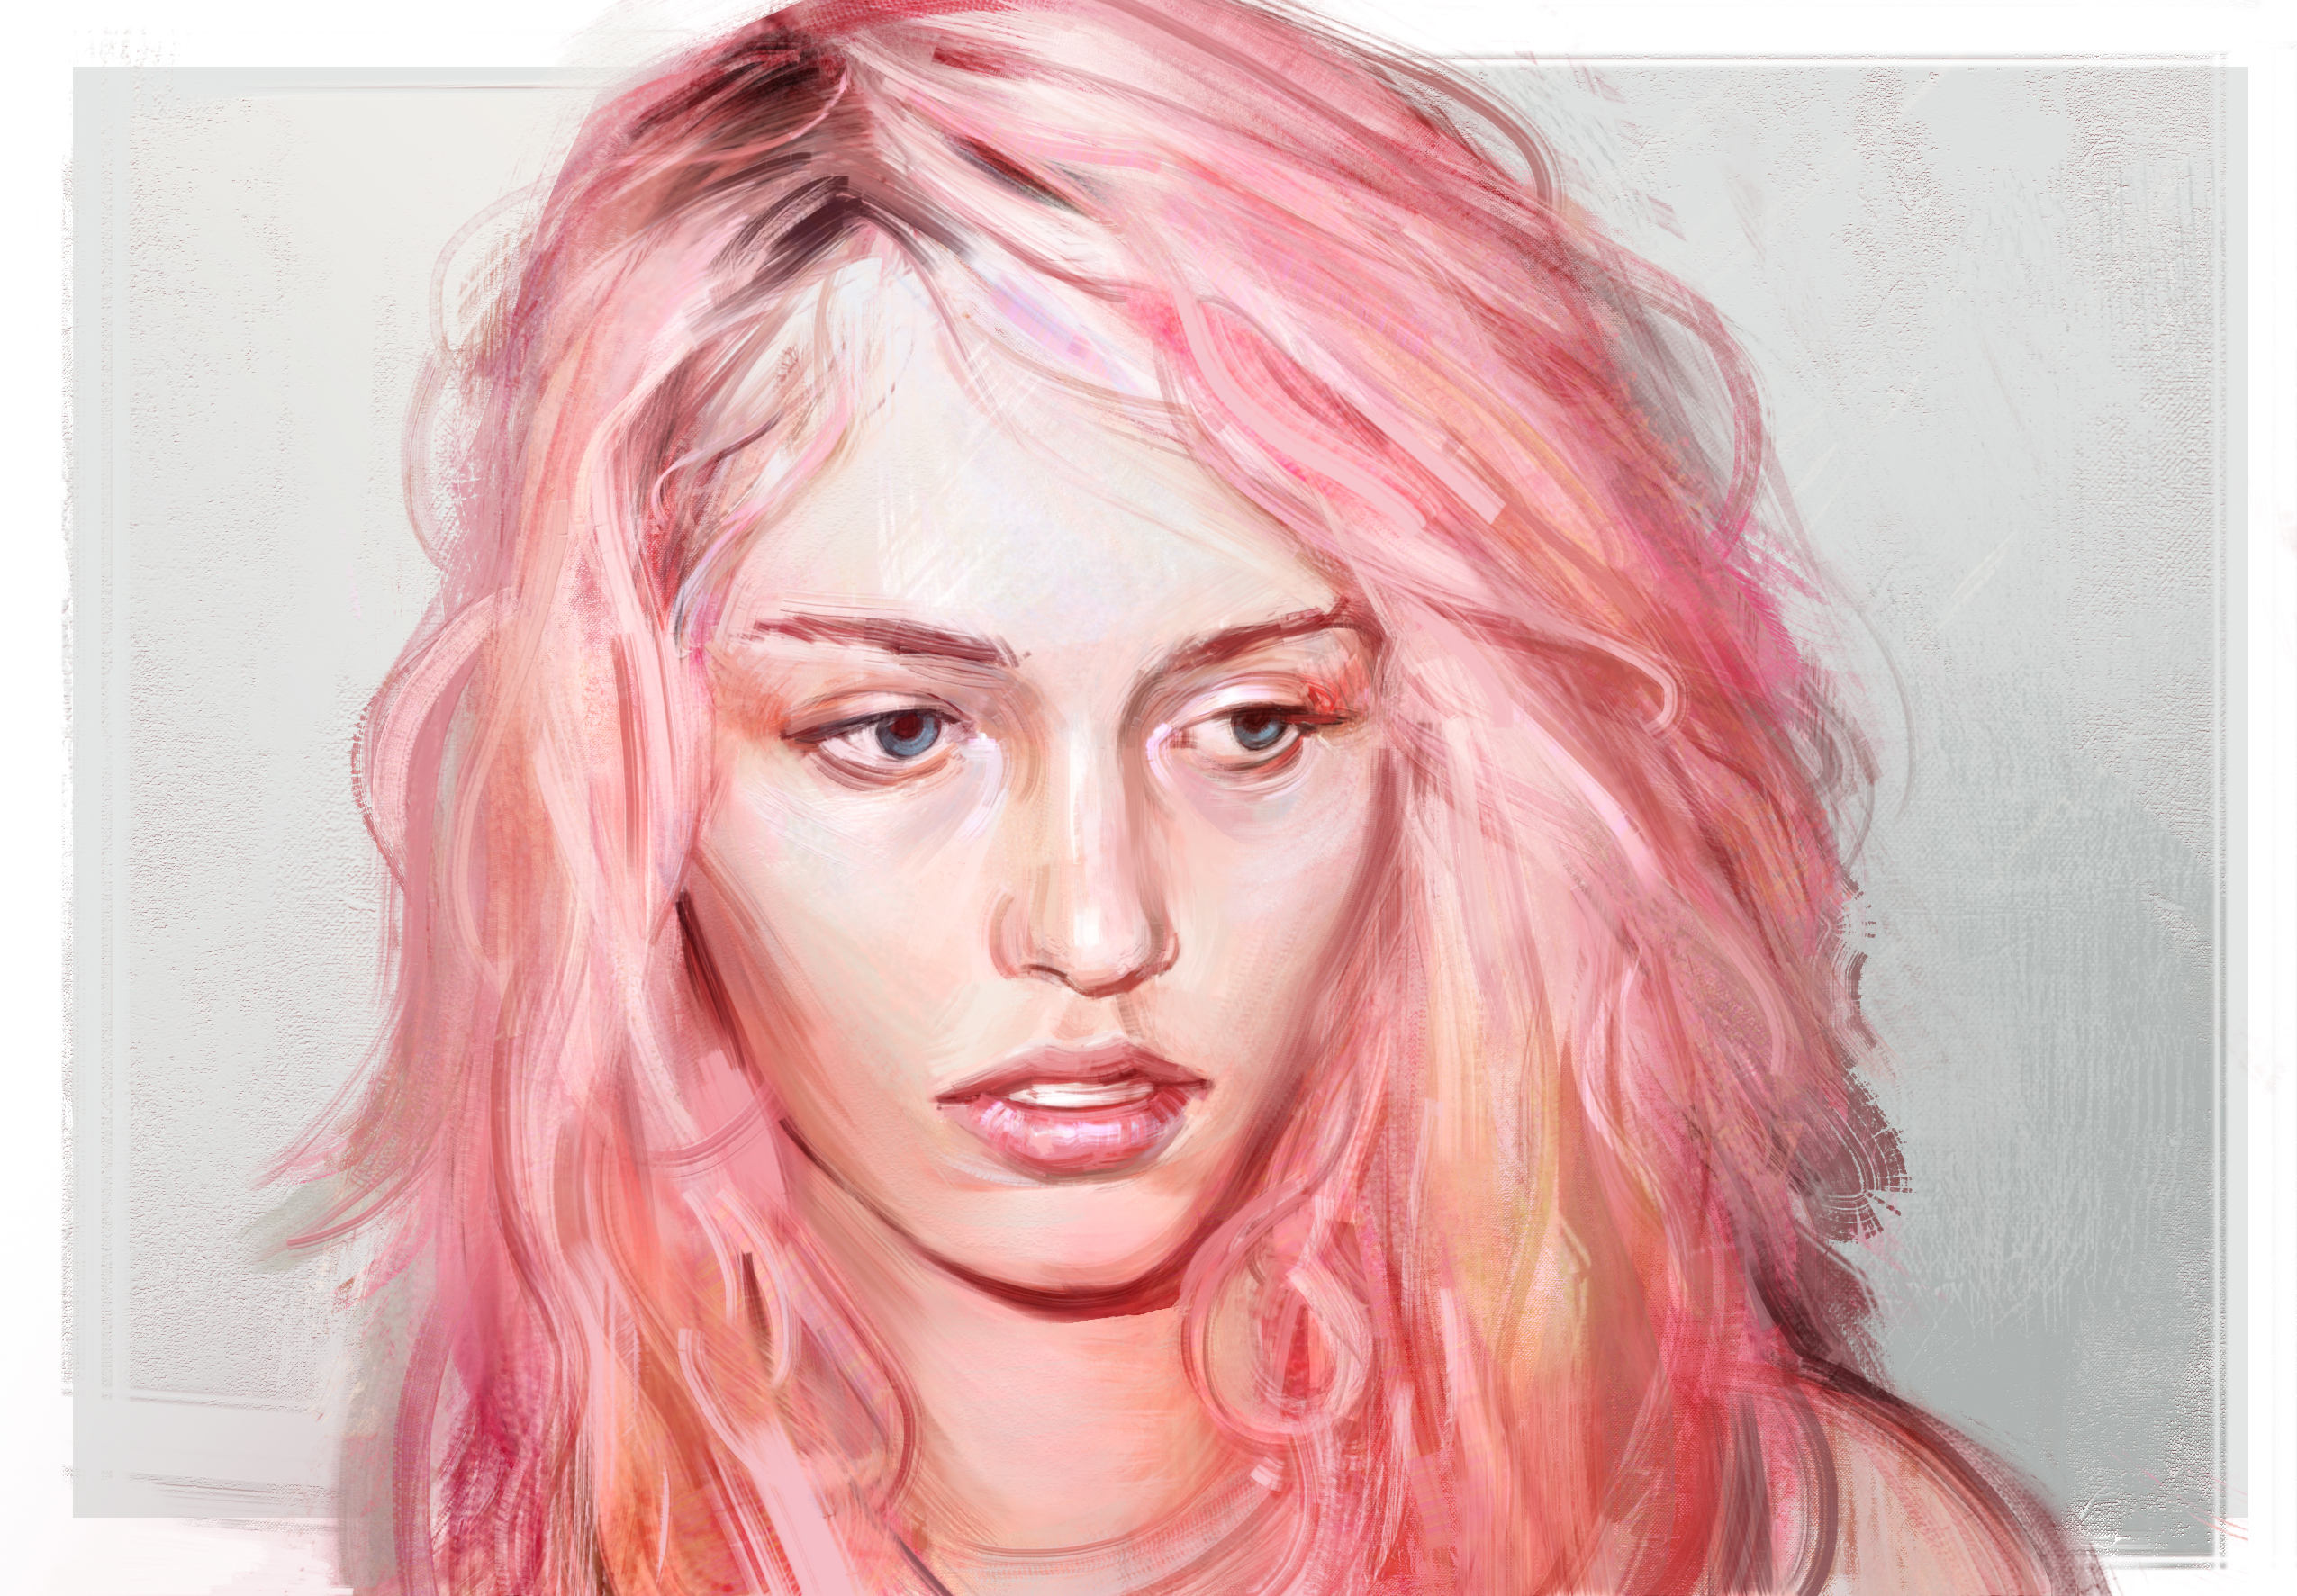 Blue Eyes Face Girl Painting Pink Hair Woman 2551x1773